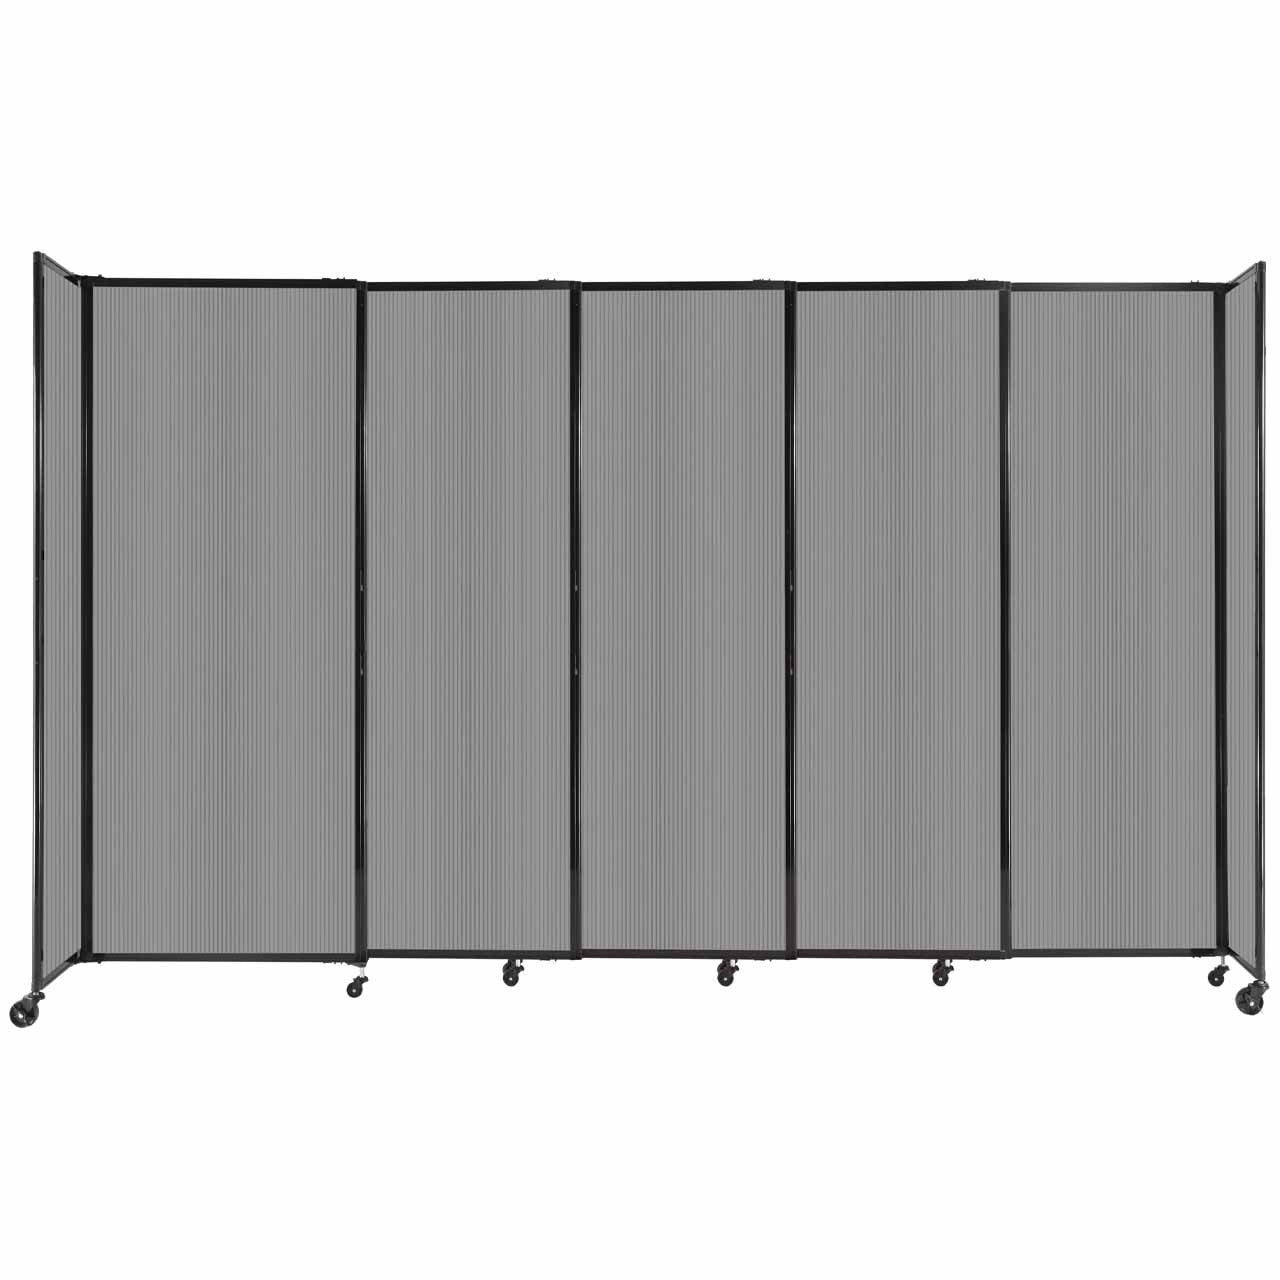 Room Divider Straight Wall Sliding Portable Partition Sound Absorbing Polycarbonate